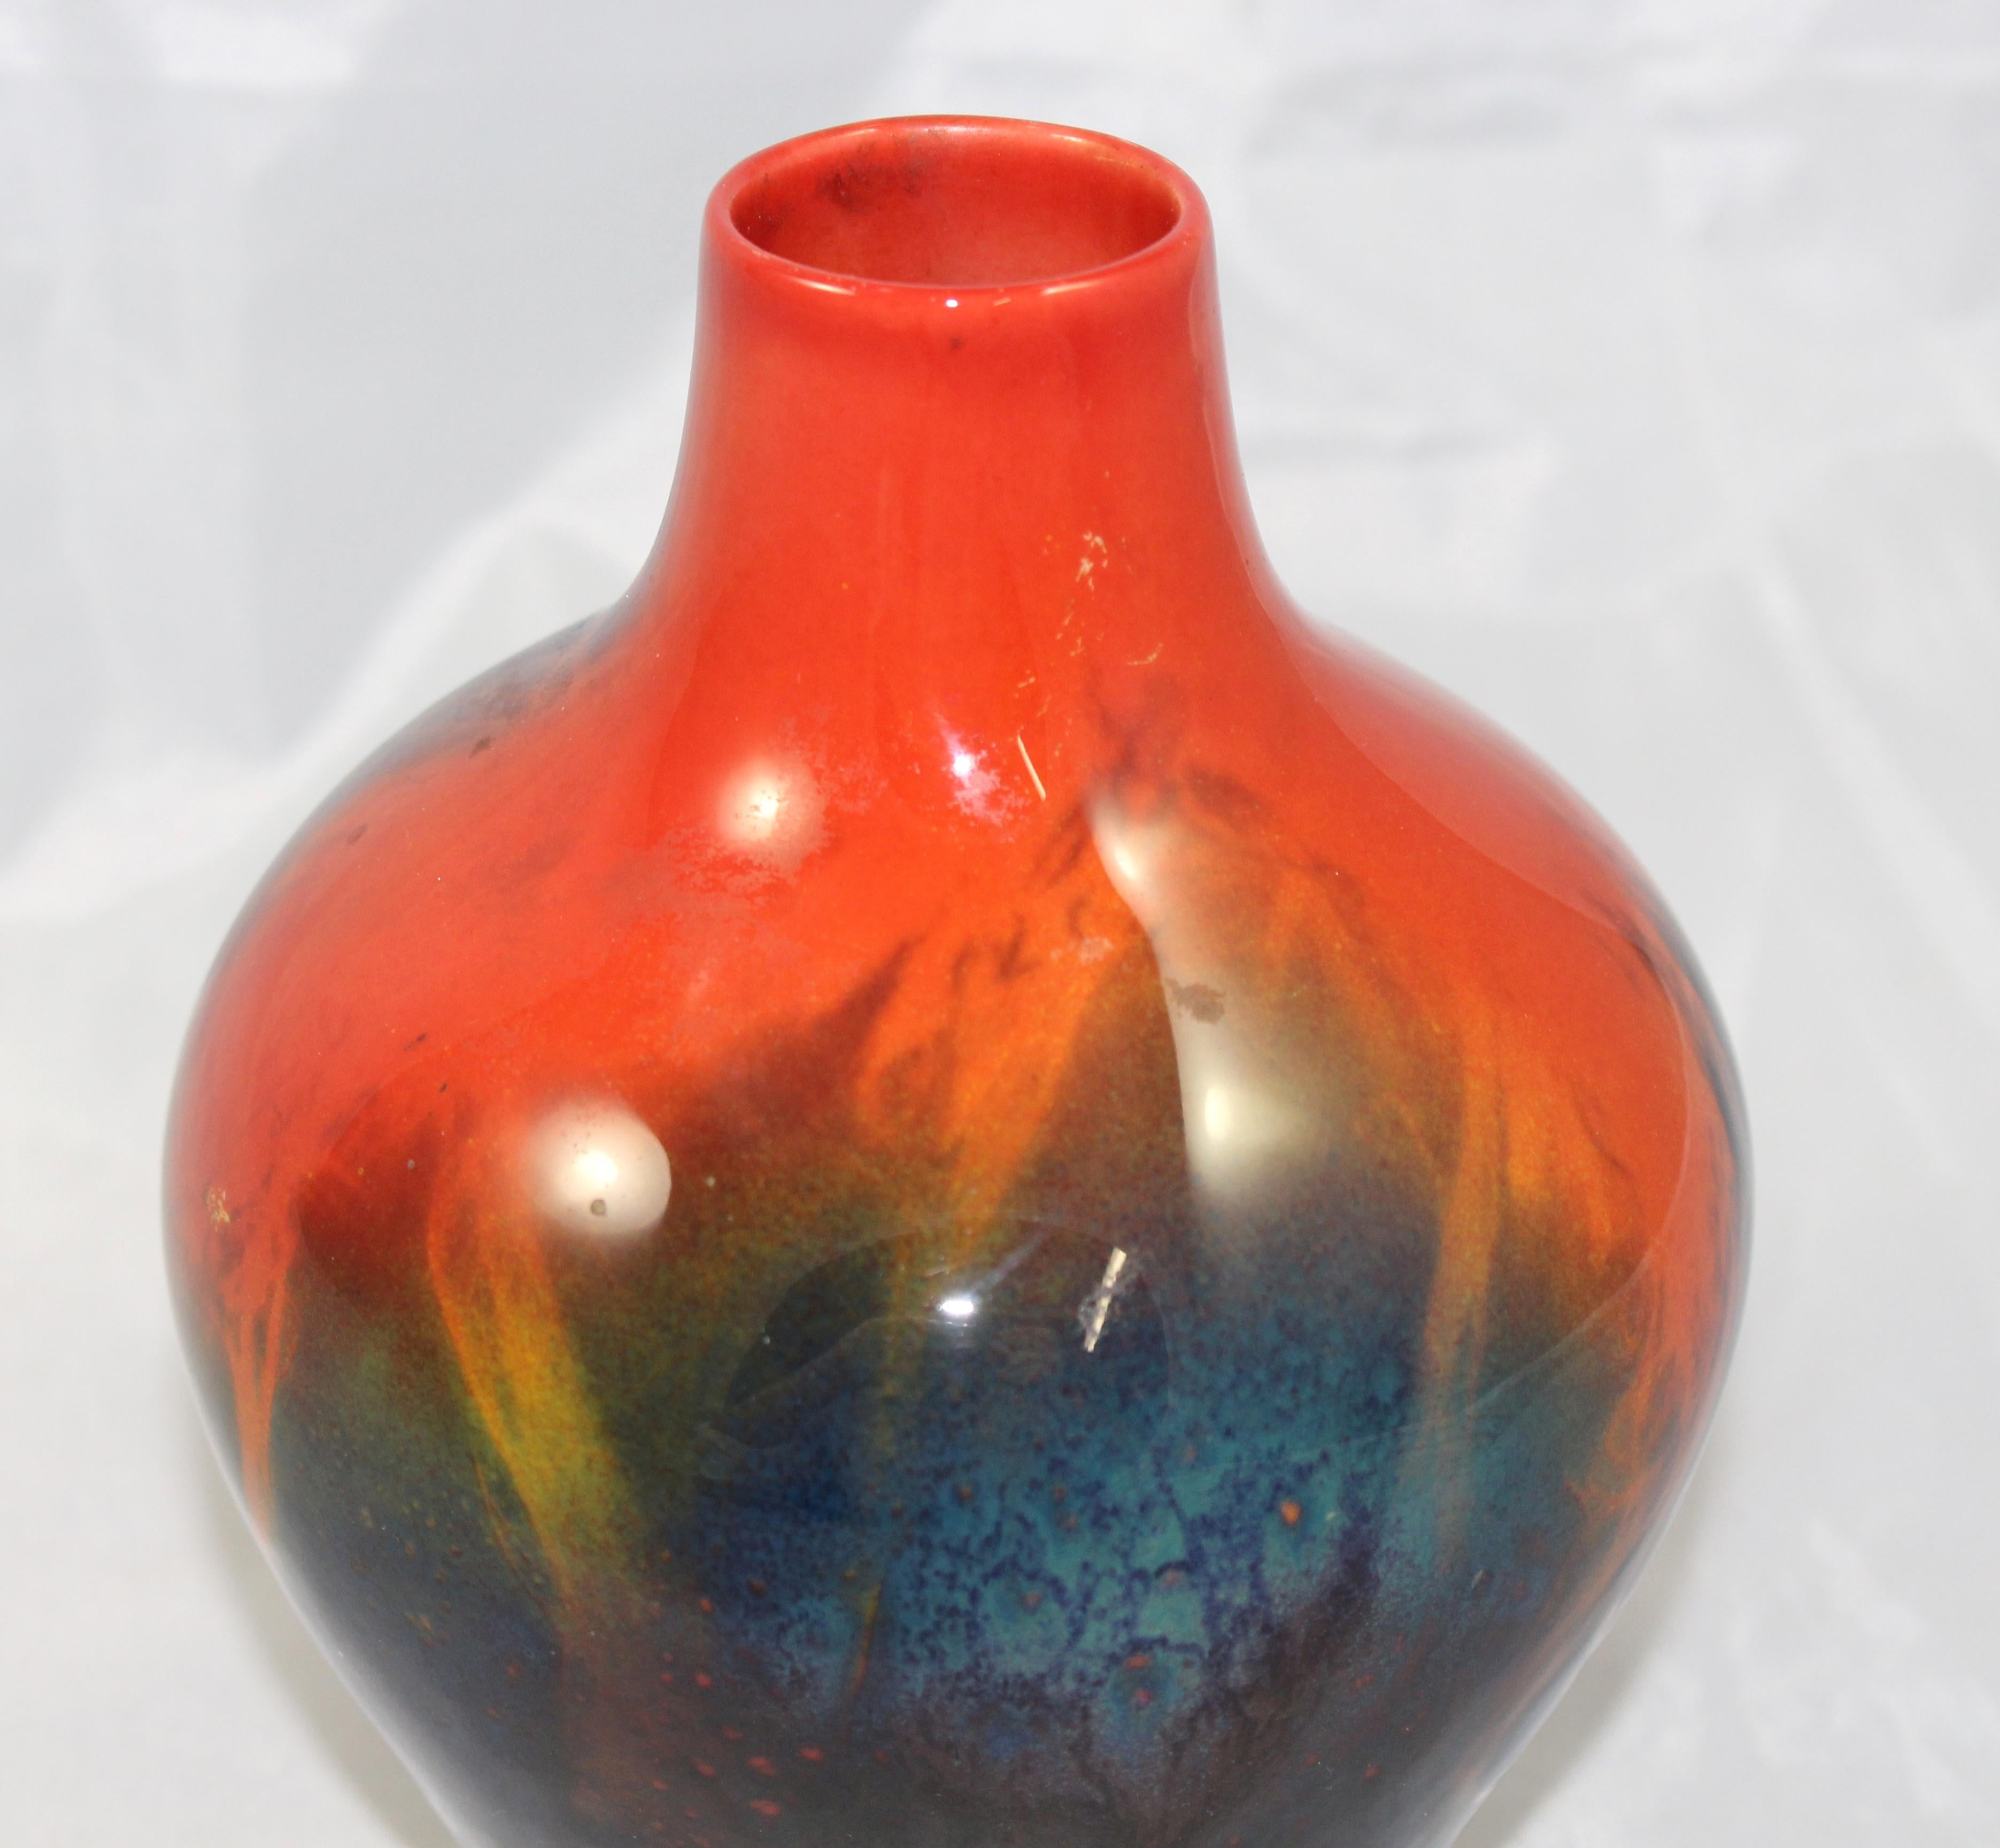 Manufacturer Royal Doulton
Ware Flambé
Subject Bulbous vase
Measures: Height 14.5 cm / 5 3/4 in
Backstamp Full, first quality Sung, Initials FM
Condition Very good condition. No chips, cracks, repairs. A few small marks (we would say under the